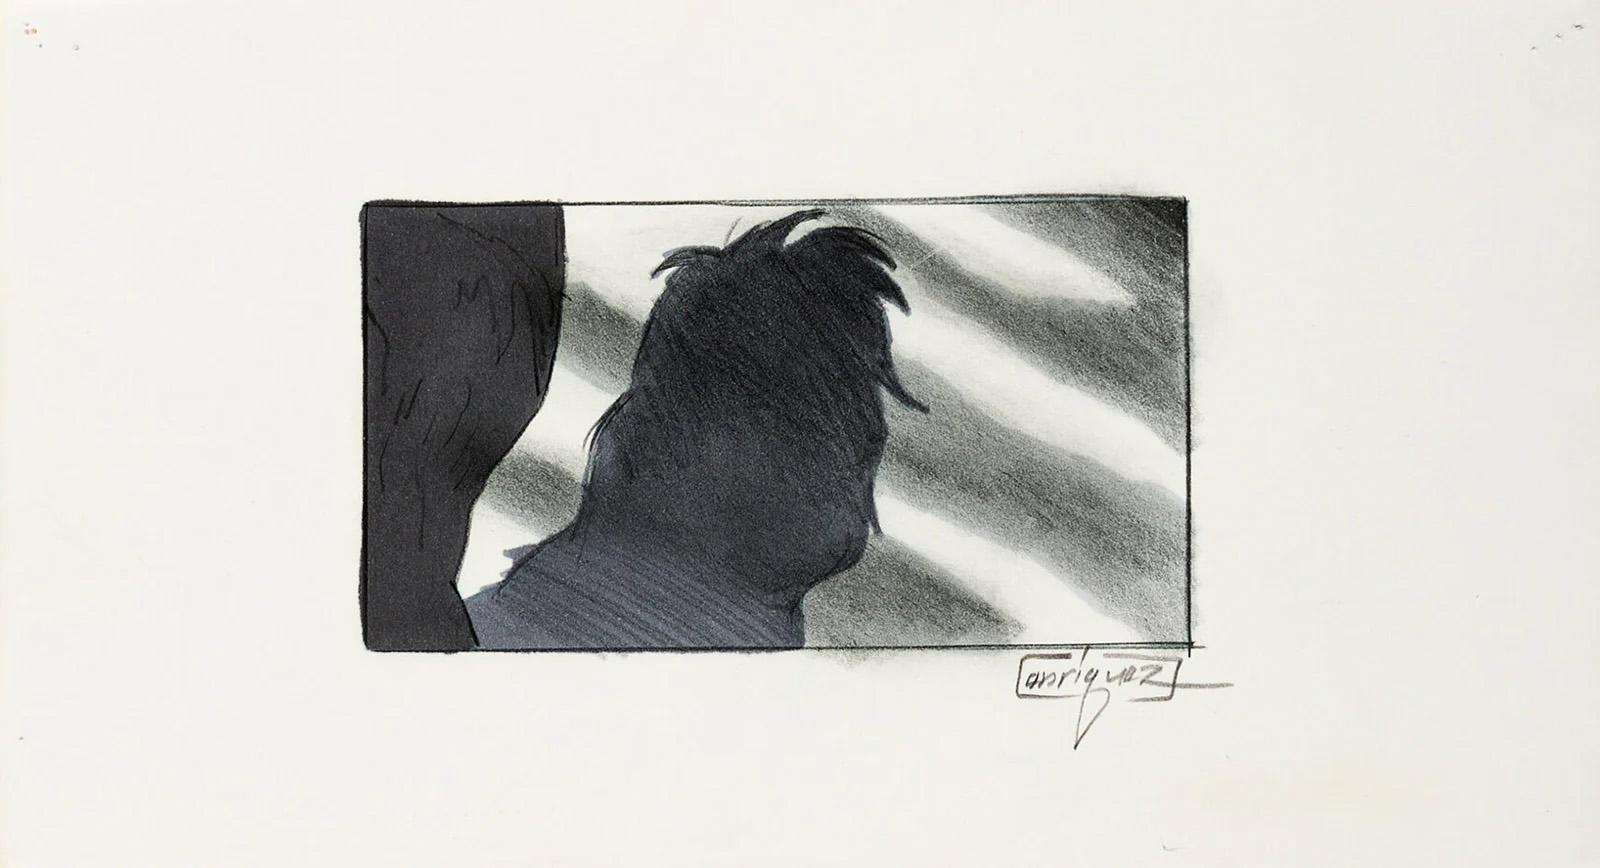 PRODUCTION: The Lion King, 1994  
MEDIUM: Set of 9 Original Storyboard Drawings
PAPER SIZE: 10